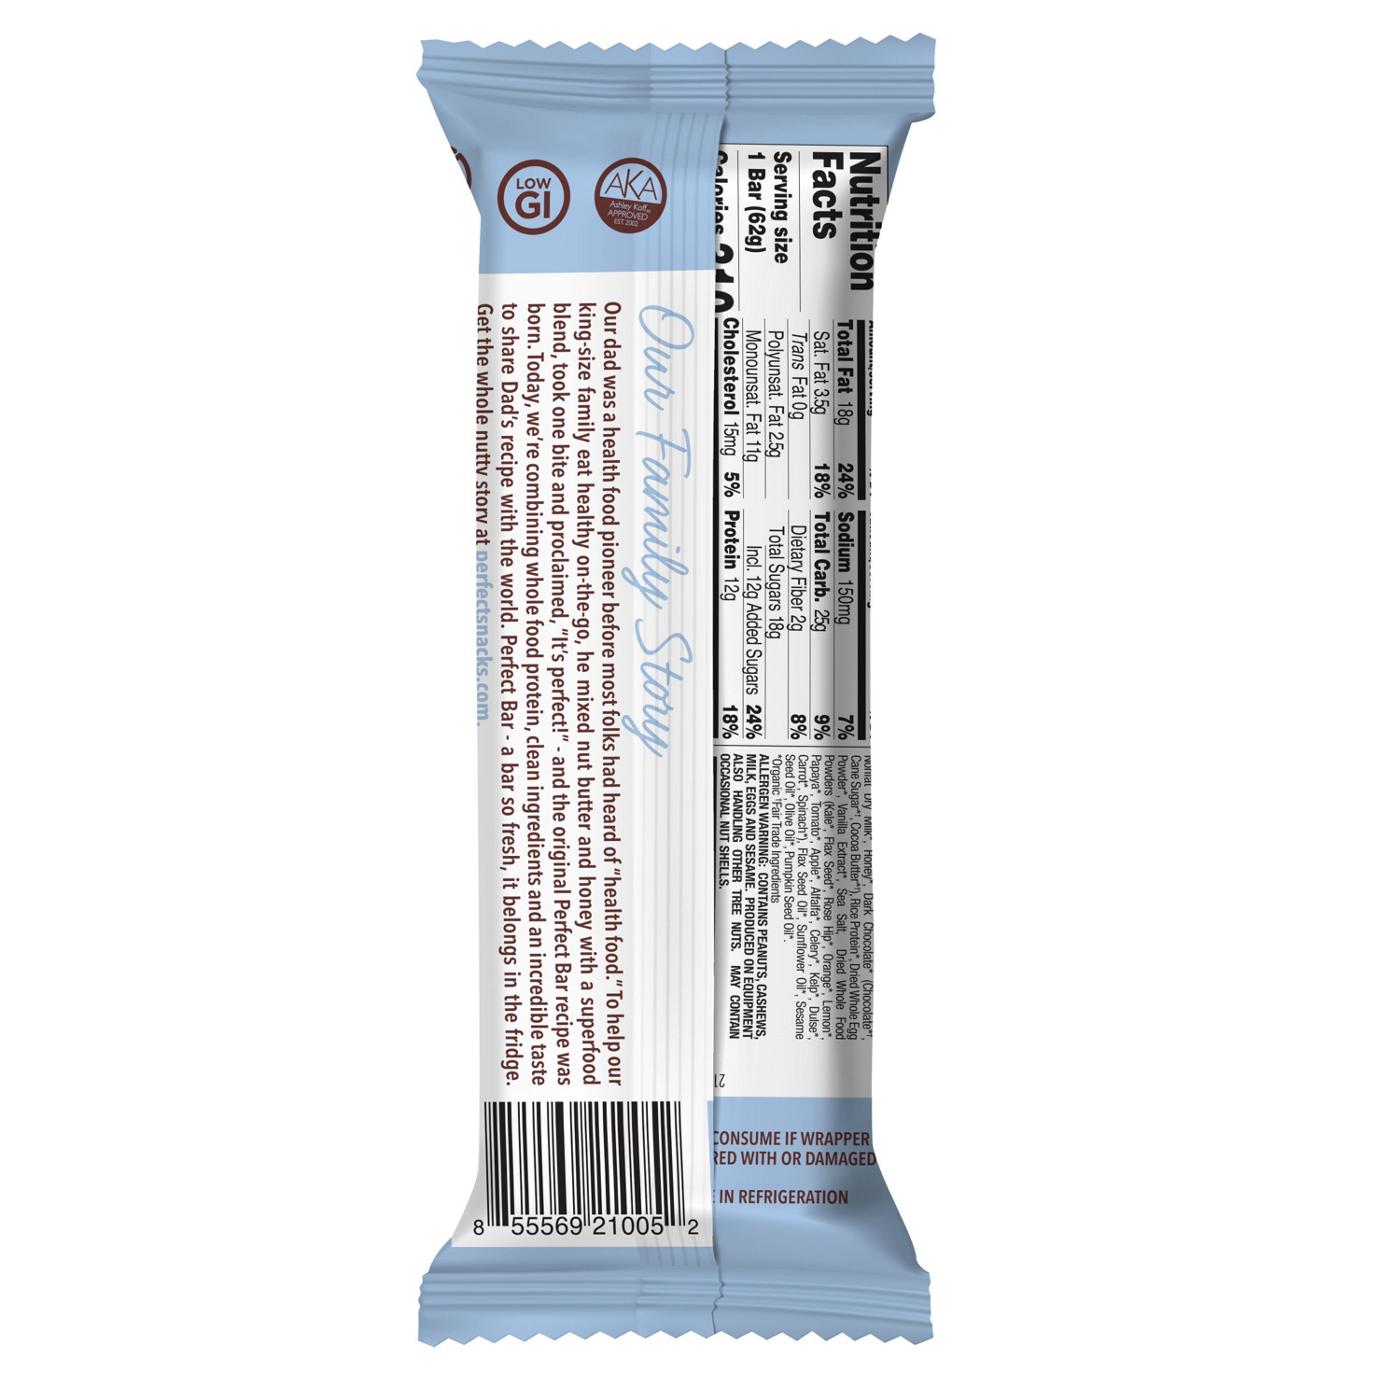 Perfect Bar 12g Protein Bar - Chocolate Chip Cookie Dough; image 2 of 2